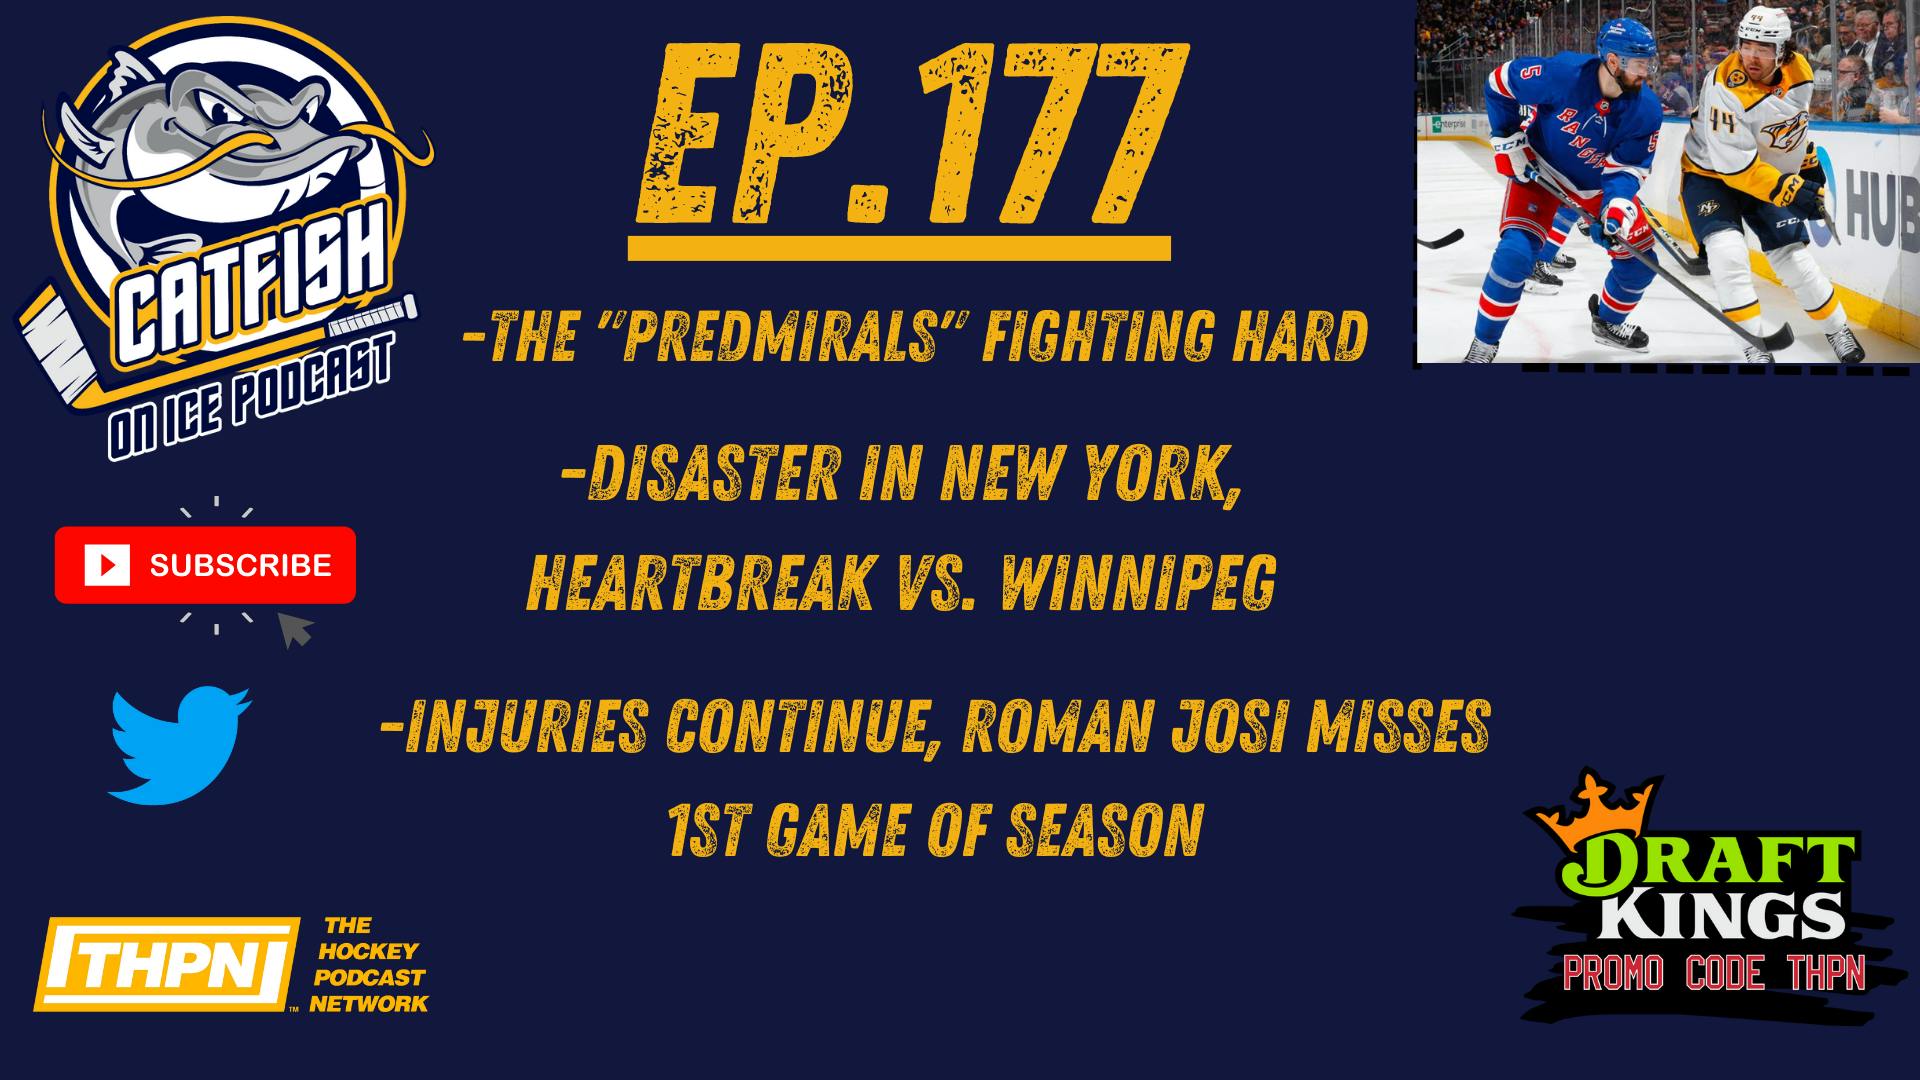 Catfish On Ice Ep.177: PREDS ARE THE NHL's UNDERDOG STORY